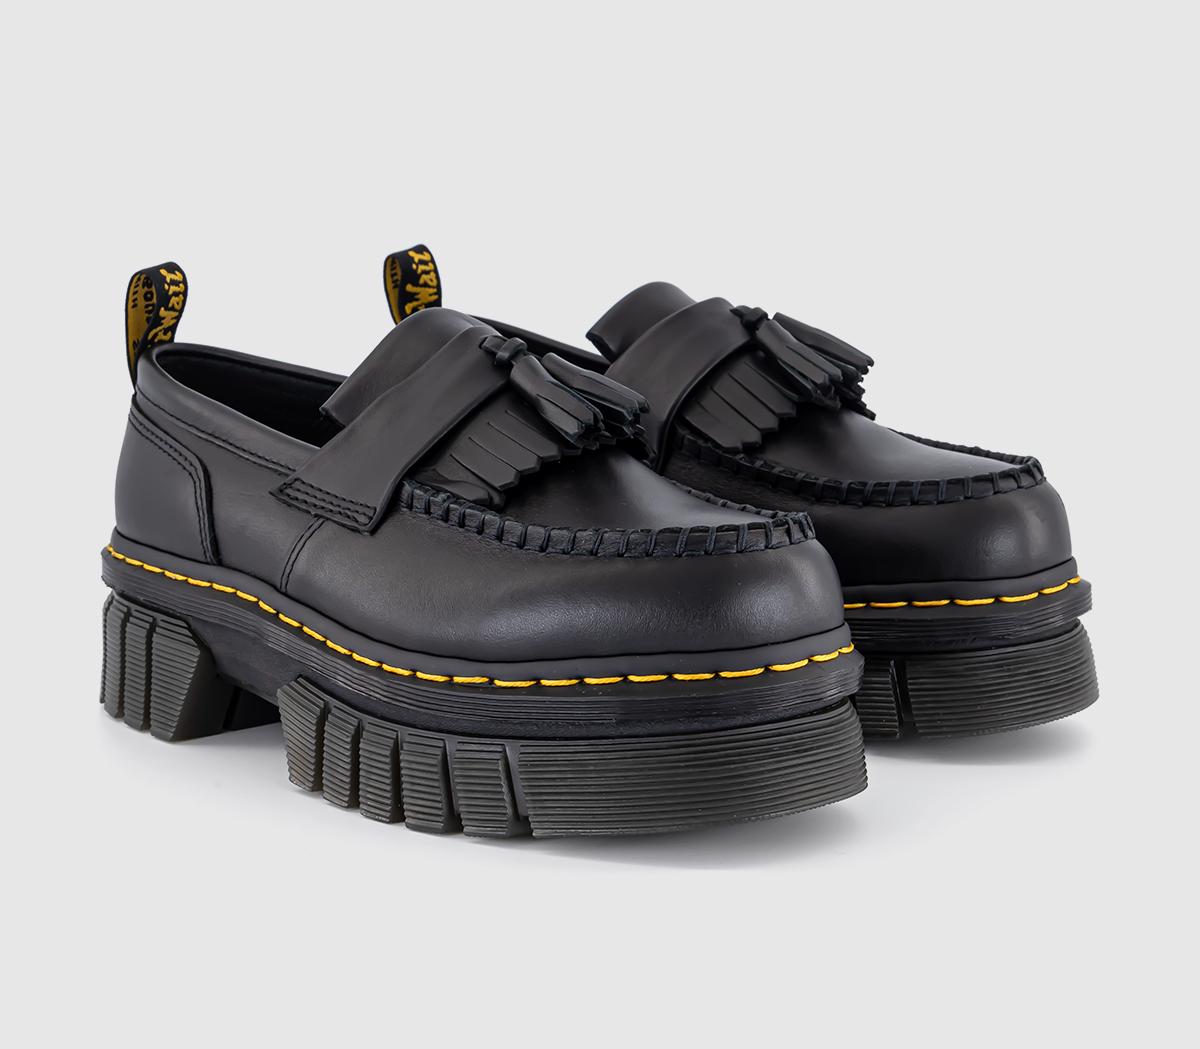 Dr. Martens Womens Adrian Audrick Loafers Black, 4